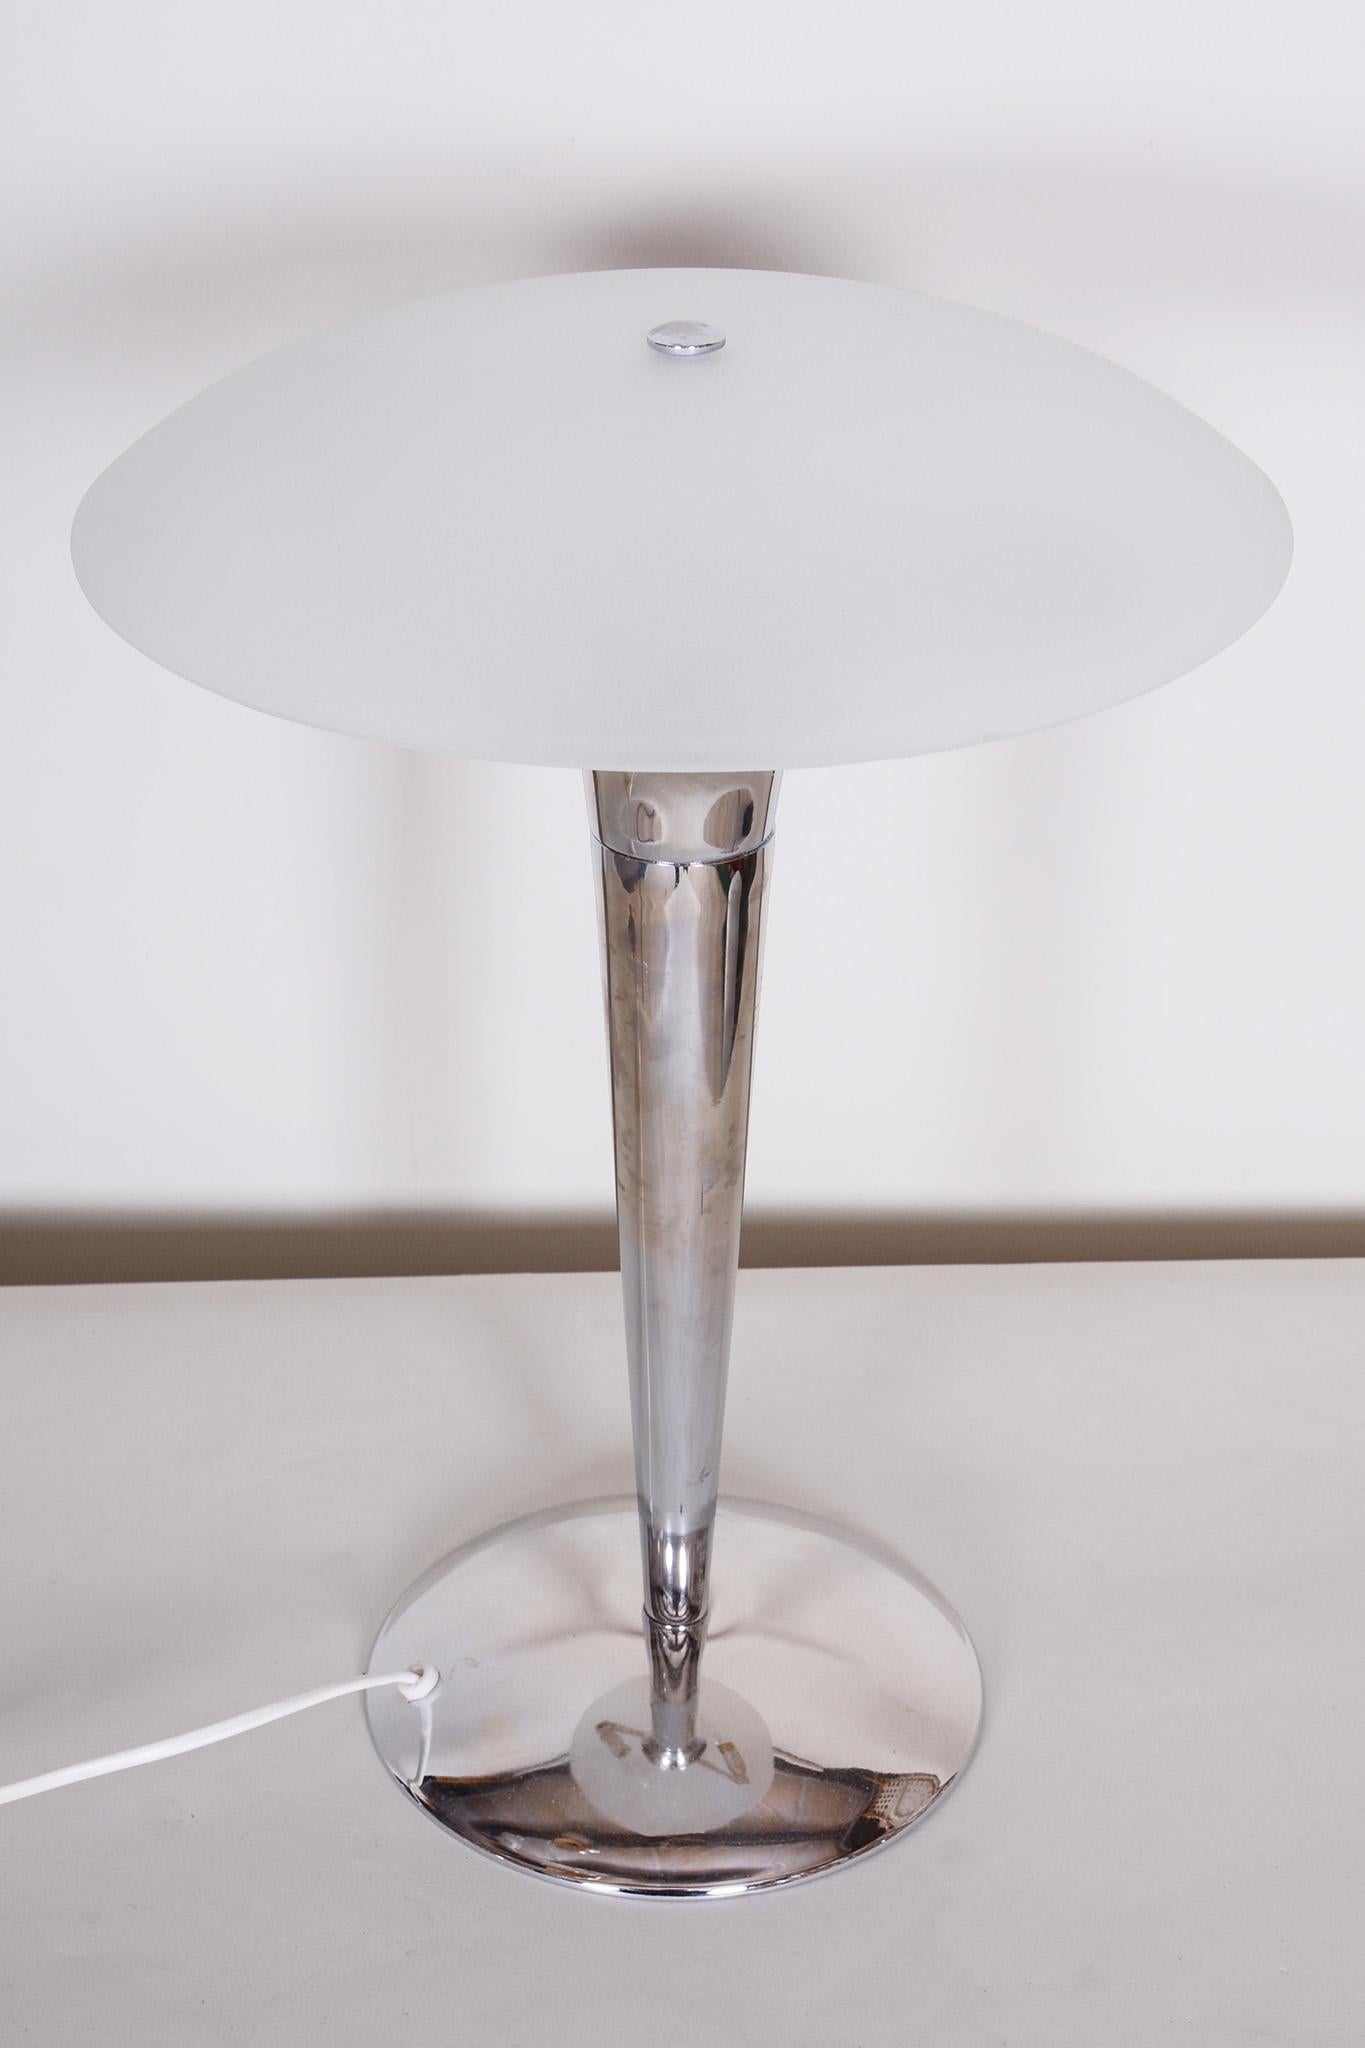 Metal Pair of Midcentury Table Lamps, Chrome-Plated Steel, Milk Glass, Germany, 1950s For Sale